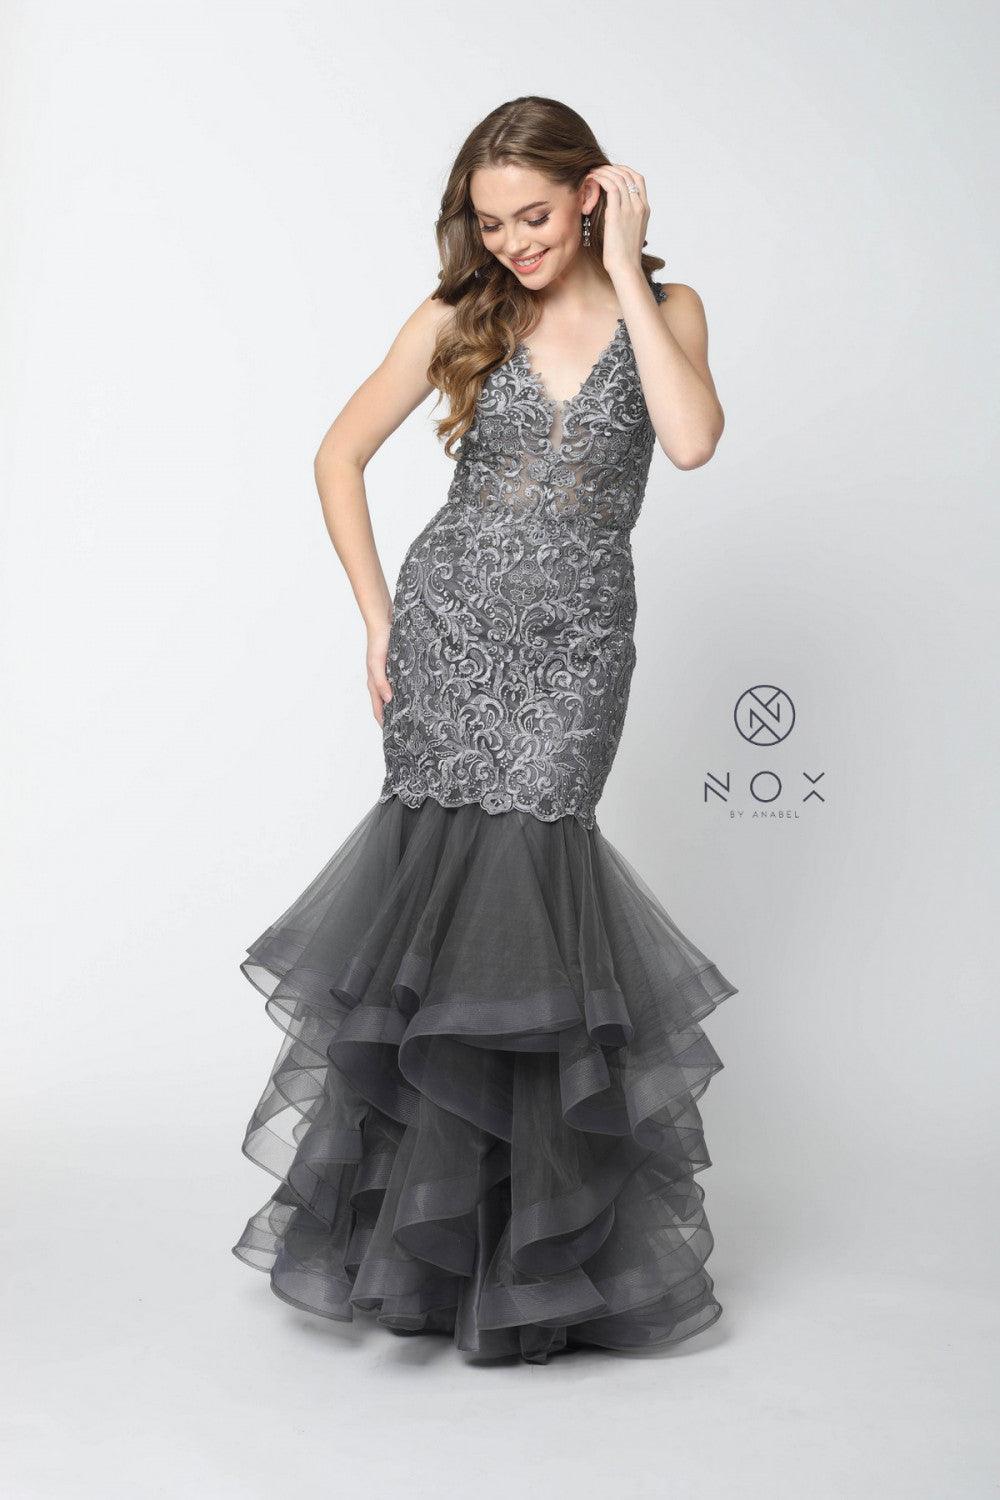 Long Prom Dress Formal Mermaid Evening Gown - The Dress Outlet Nox Anabel